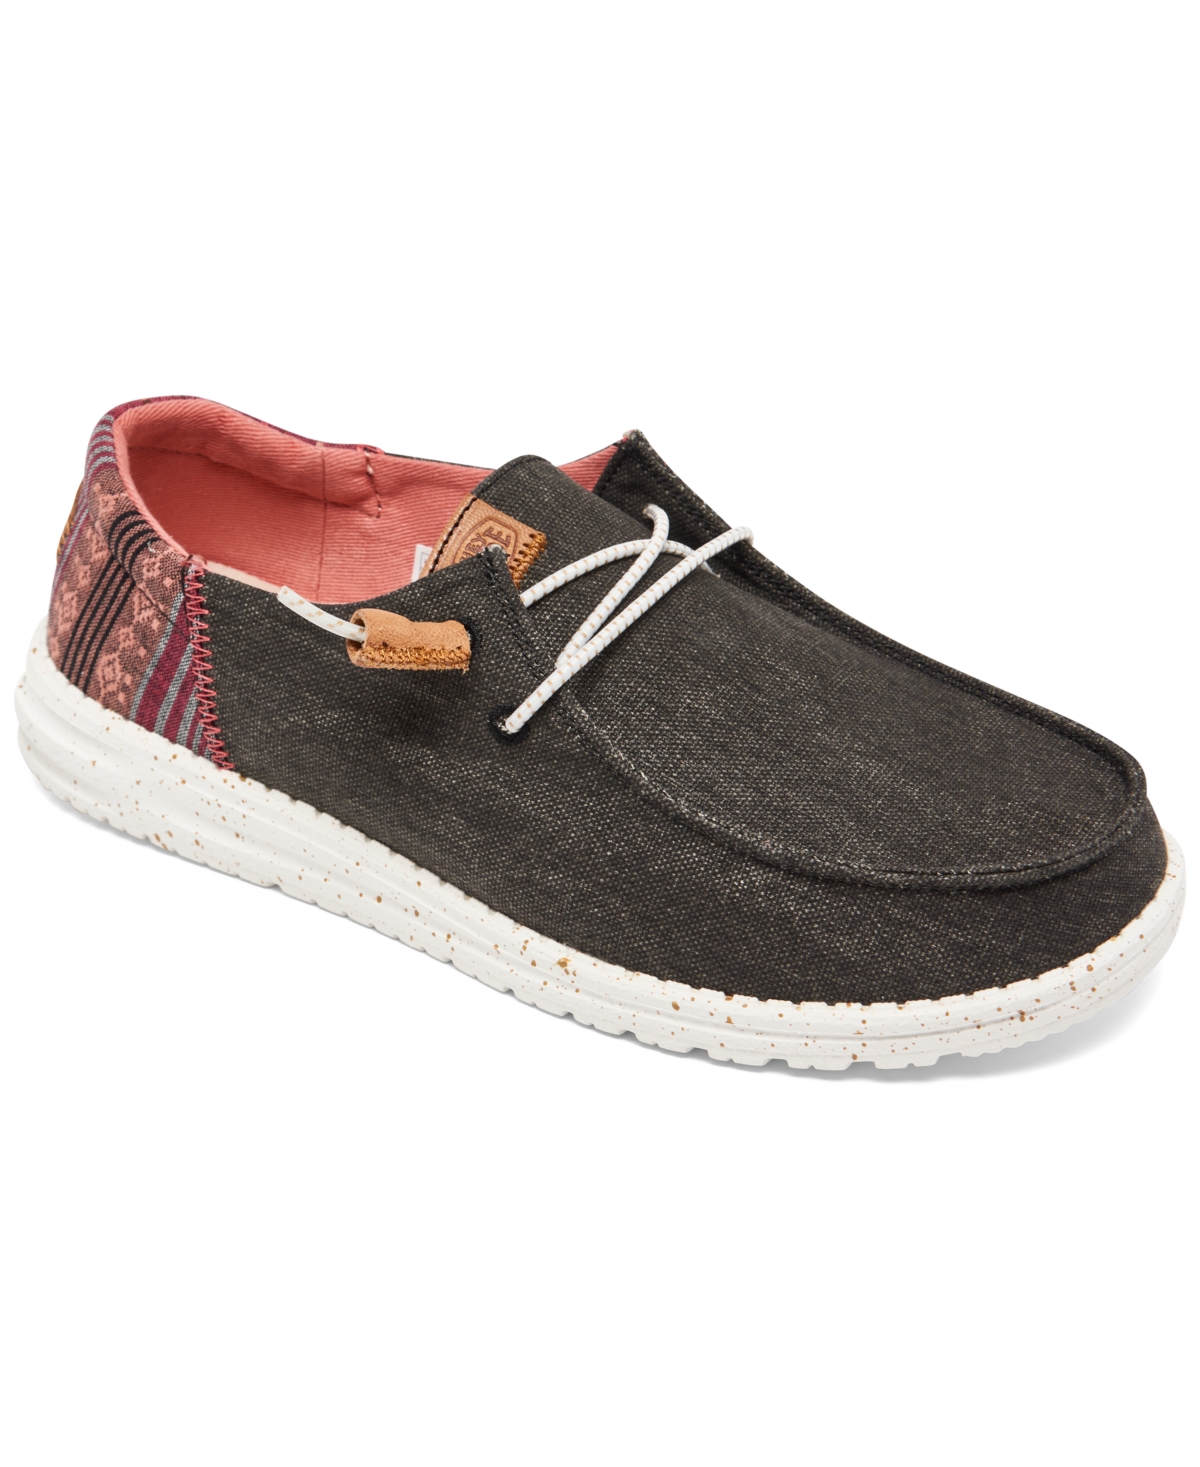 Women's Wendy Funk Casual Moccasin Sneakers from Finish Line - Baja Black